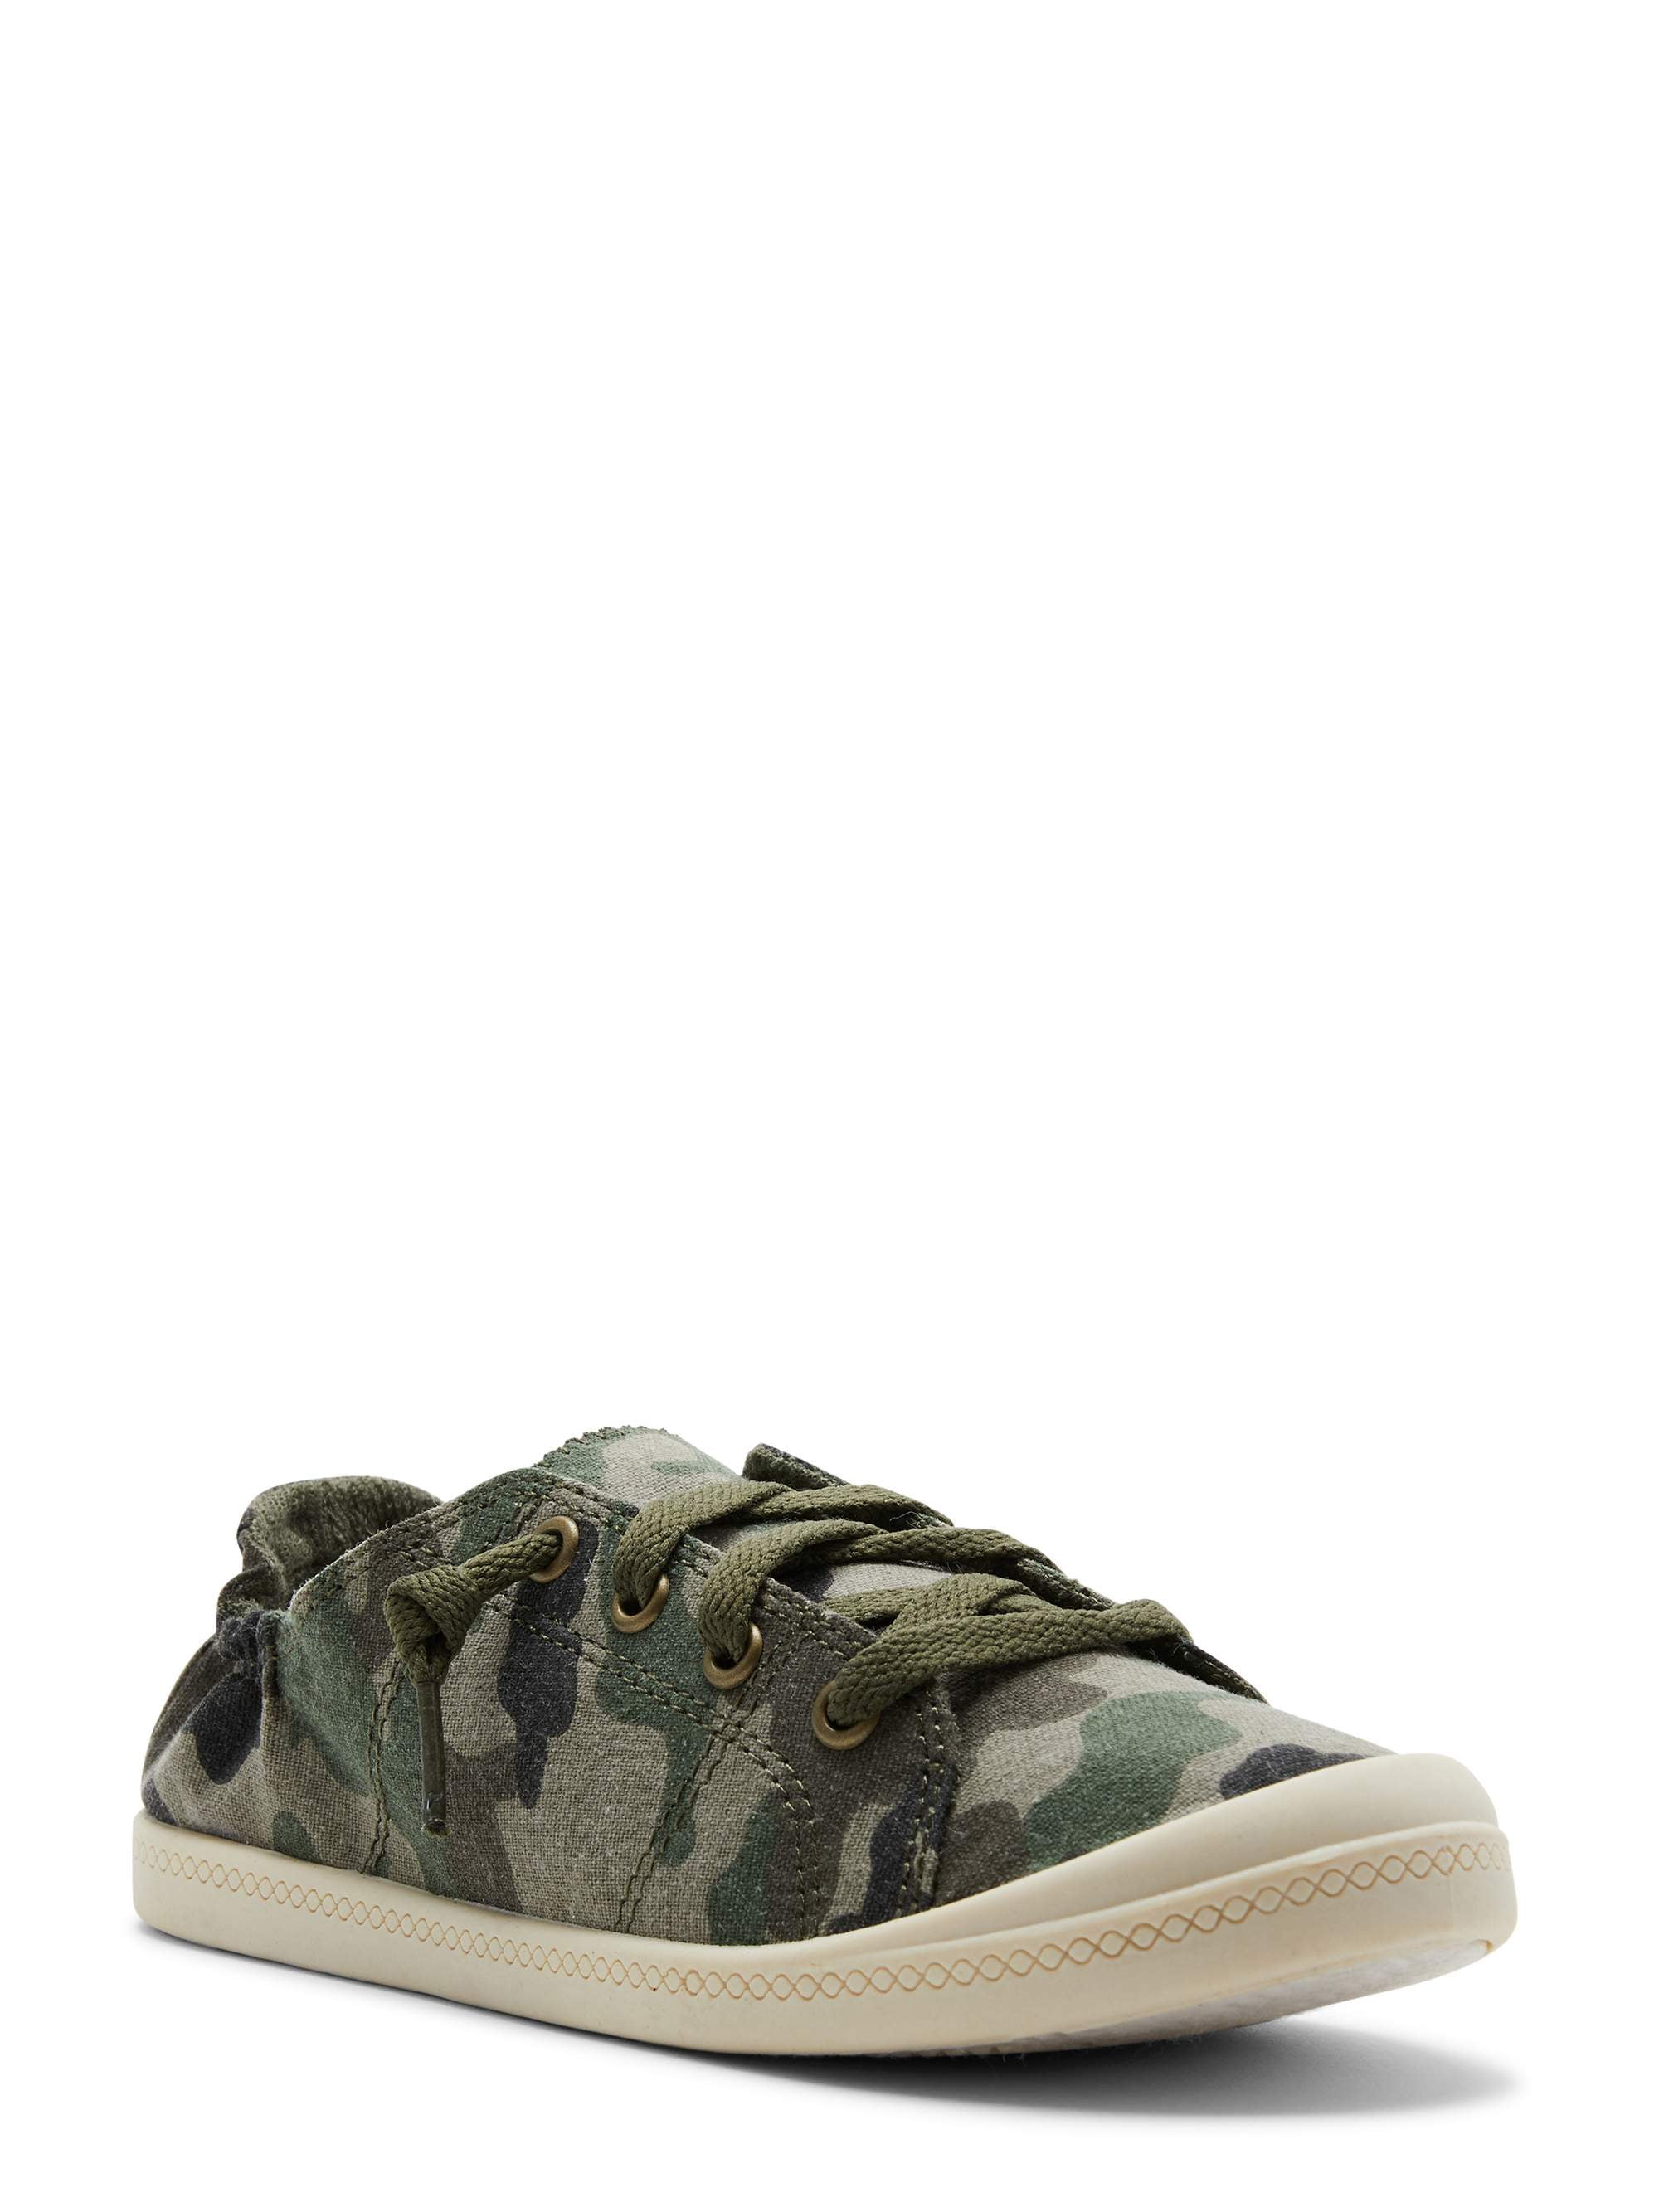 Women Lightweight Camouflage Tree Shoes Canvas Sneakers 